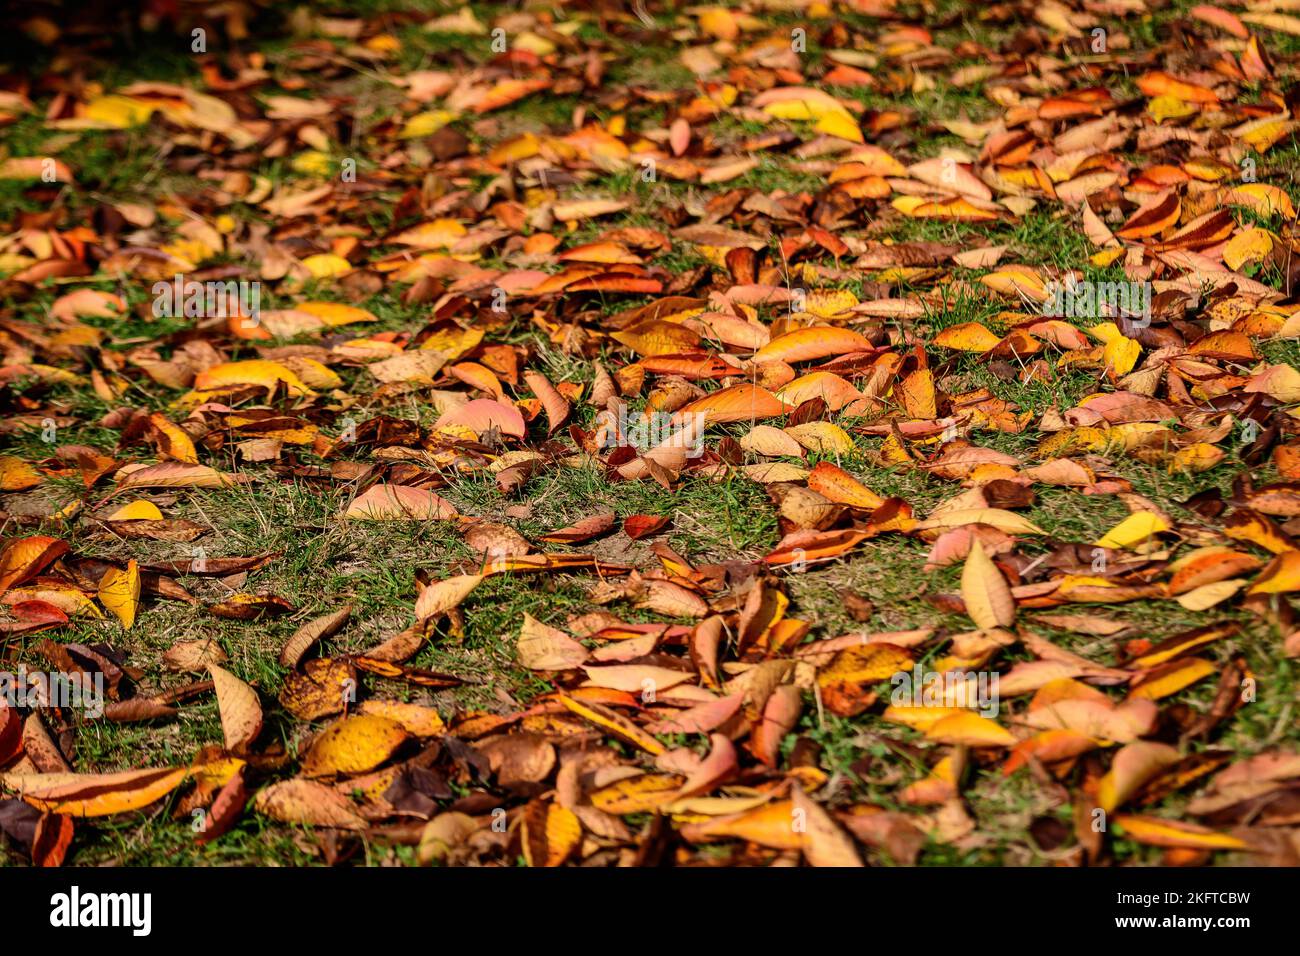 Minimalist monochrome background with many large red and orange leaves and small flowers on green grass in a park in a sunny autumn day Stock Photo